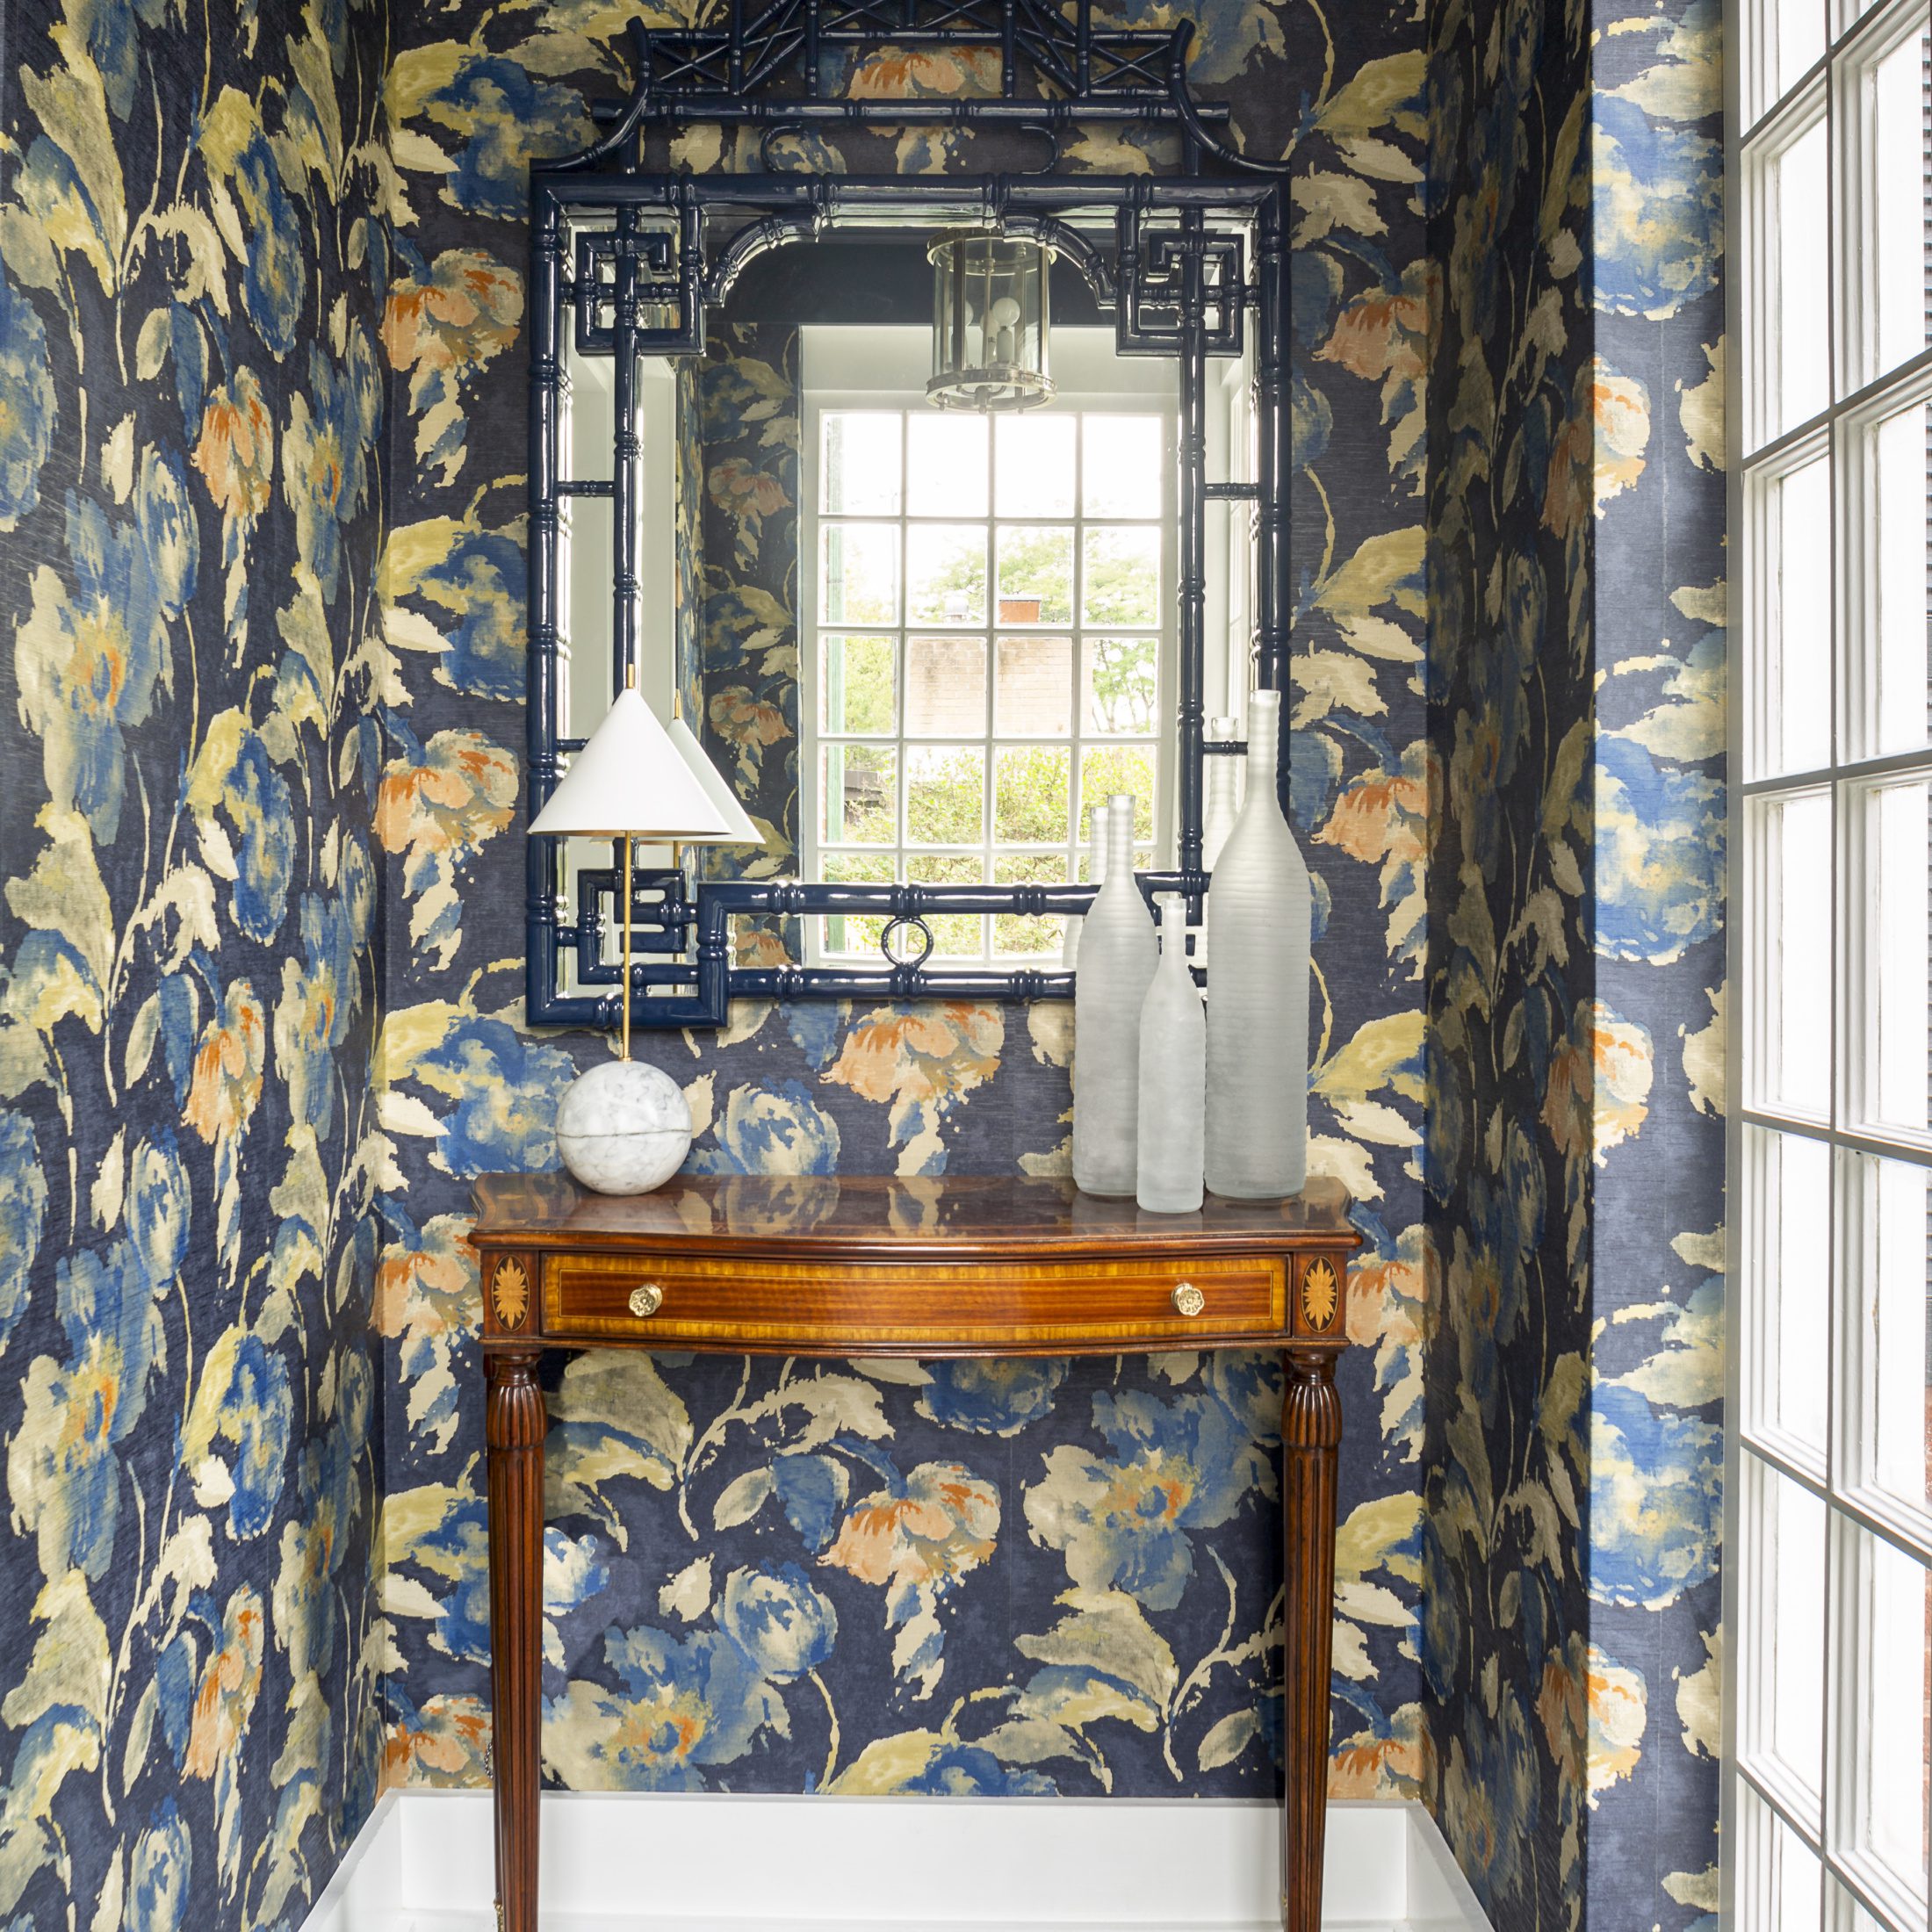 Glencoe wooden side table with navy blue floral wallpaper